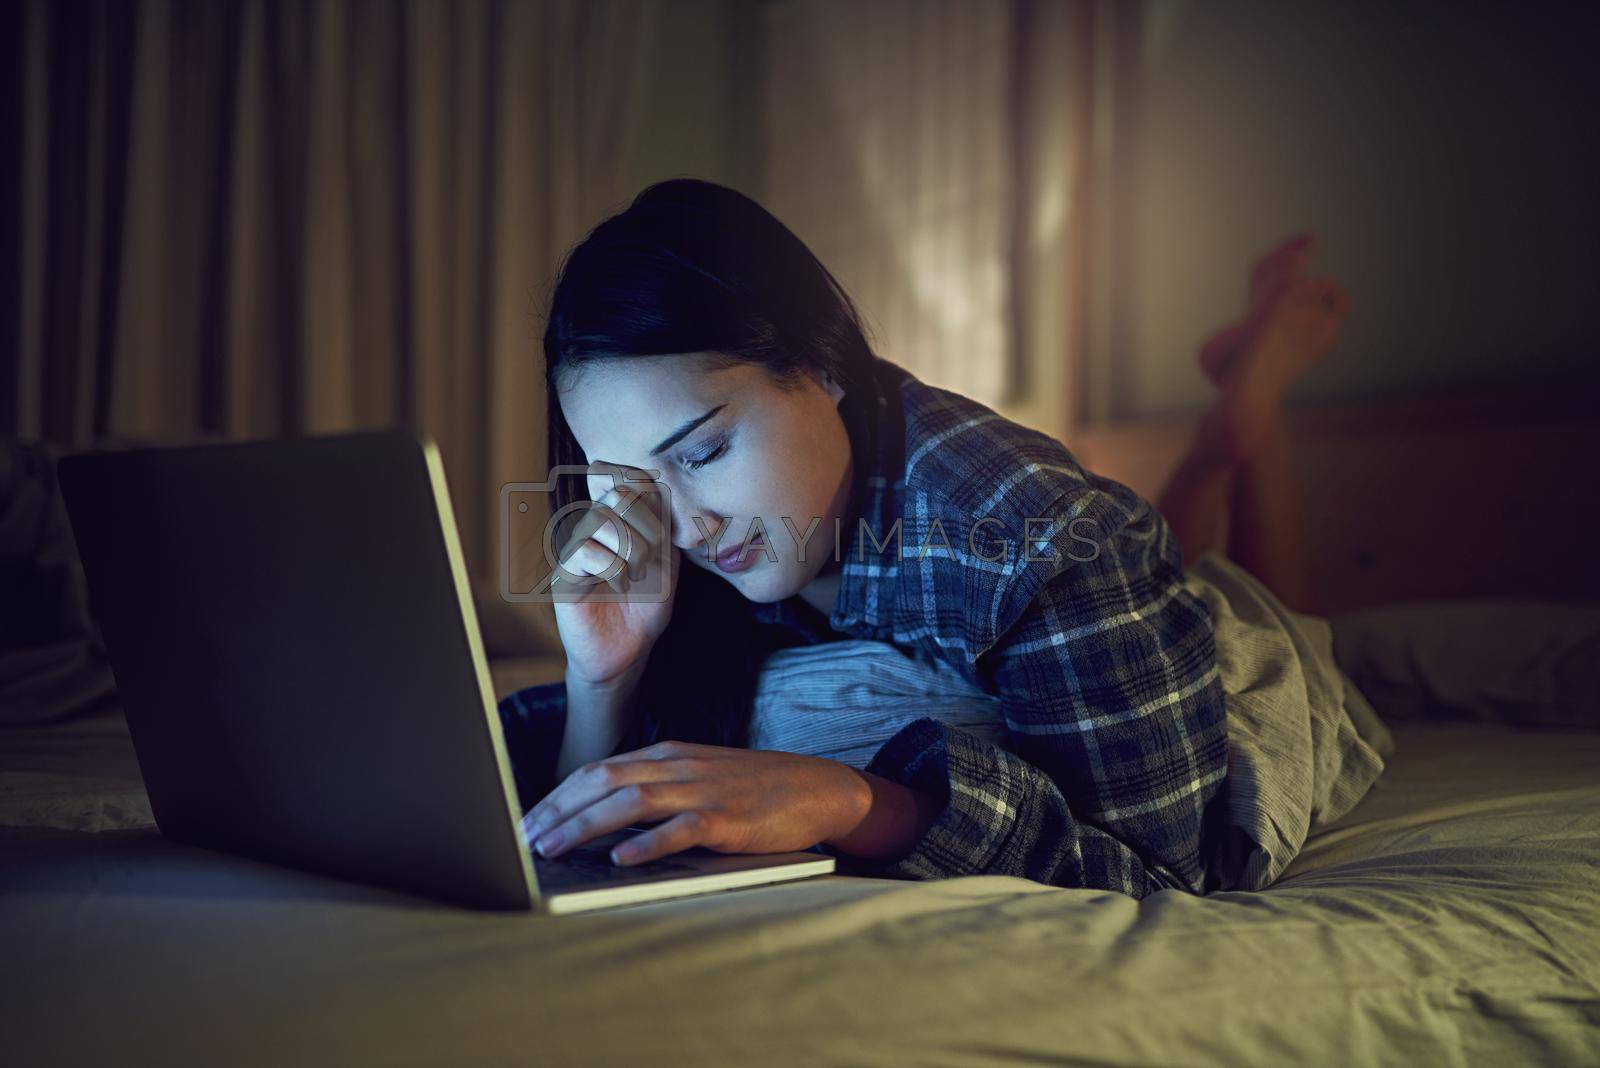 Royalty free image of Its been a late night online. Shot of a sleepy young woman using a laptop late at night while lying on her bed in her bedroom. by YuriArcurs